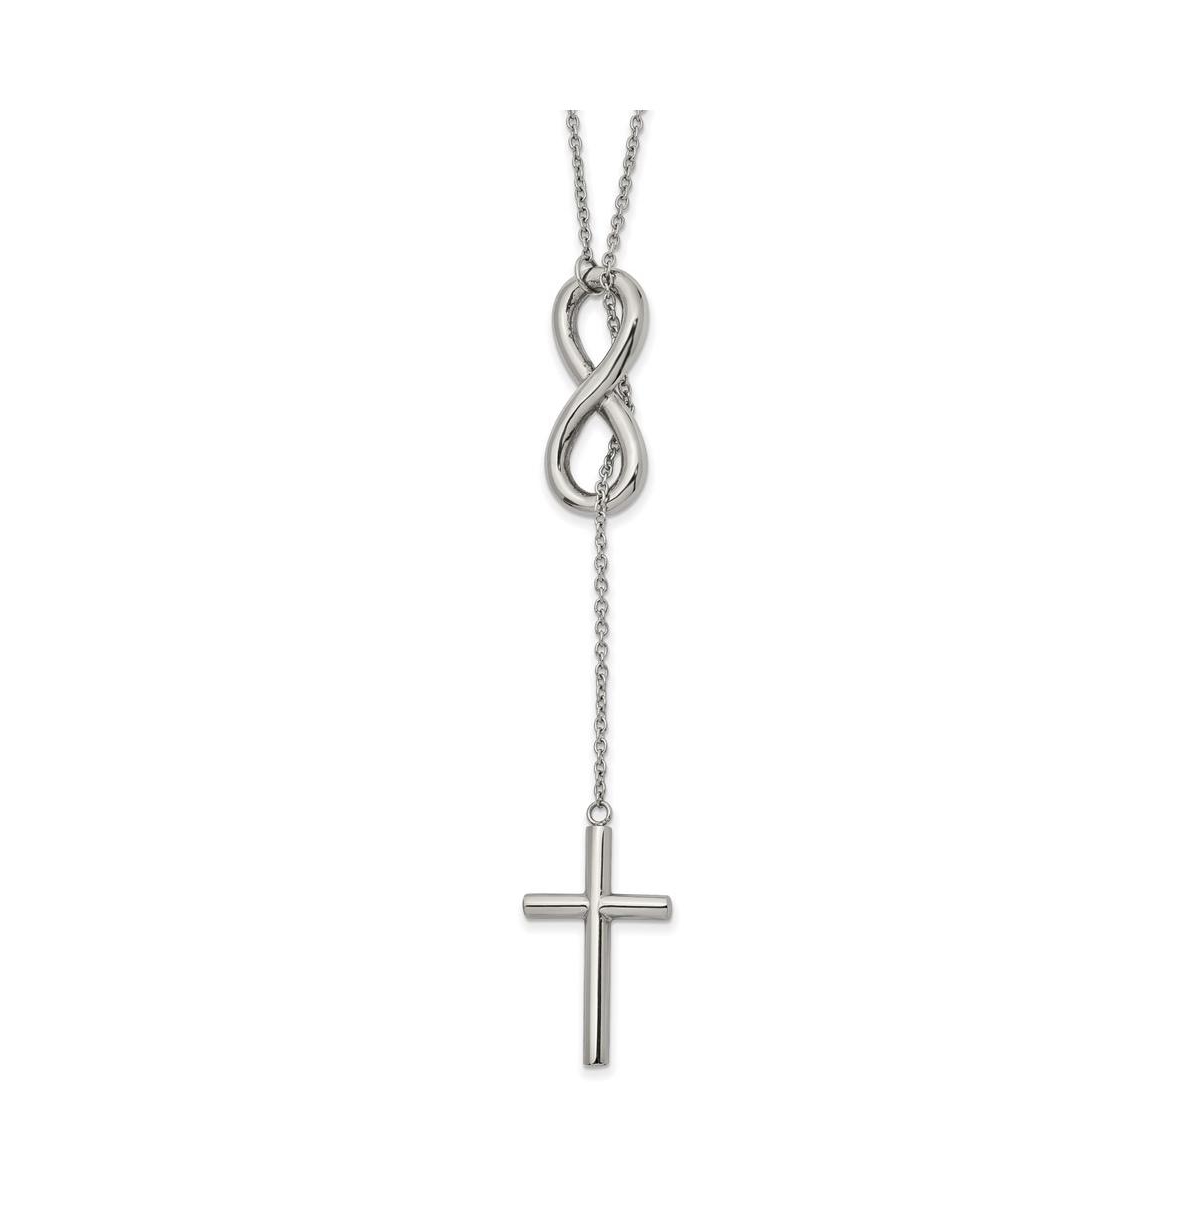 Cross/Infinity Adjustable up to 25 inch Slip-on Cable Chain Necklace - Silver